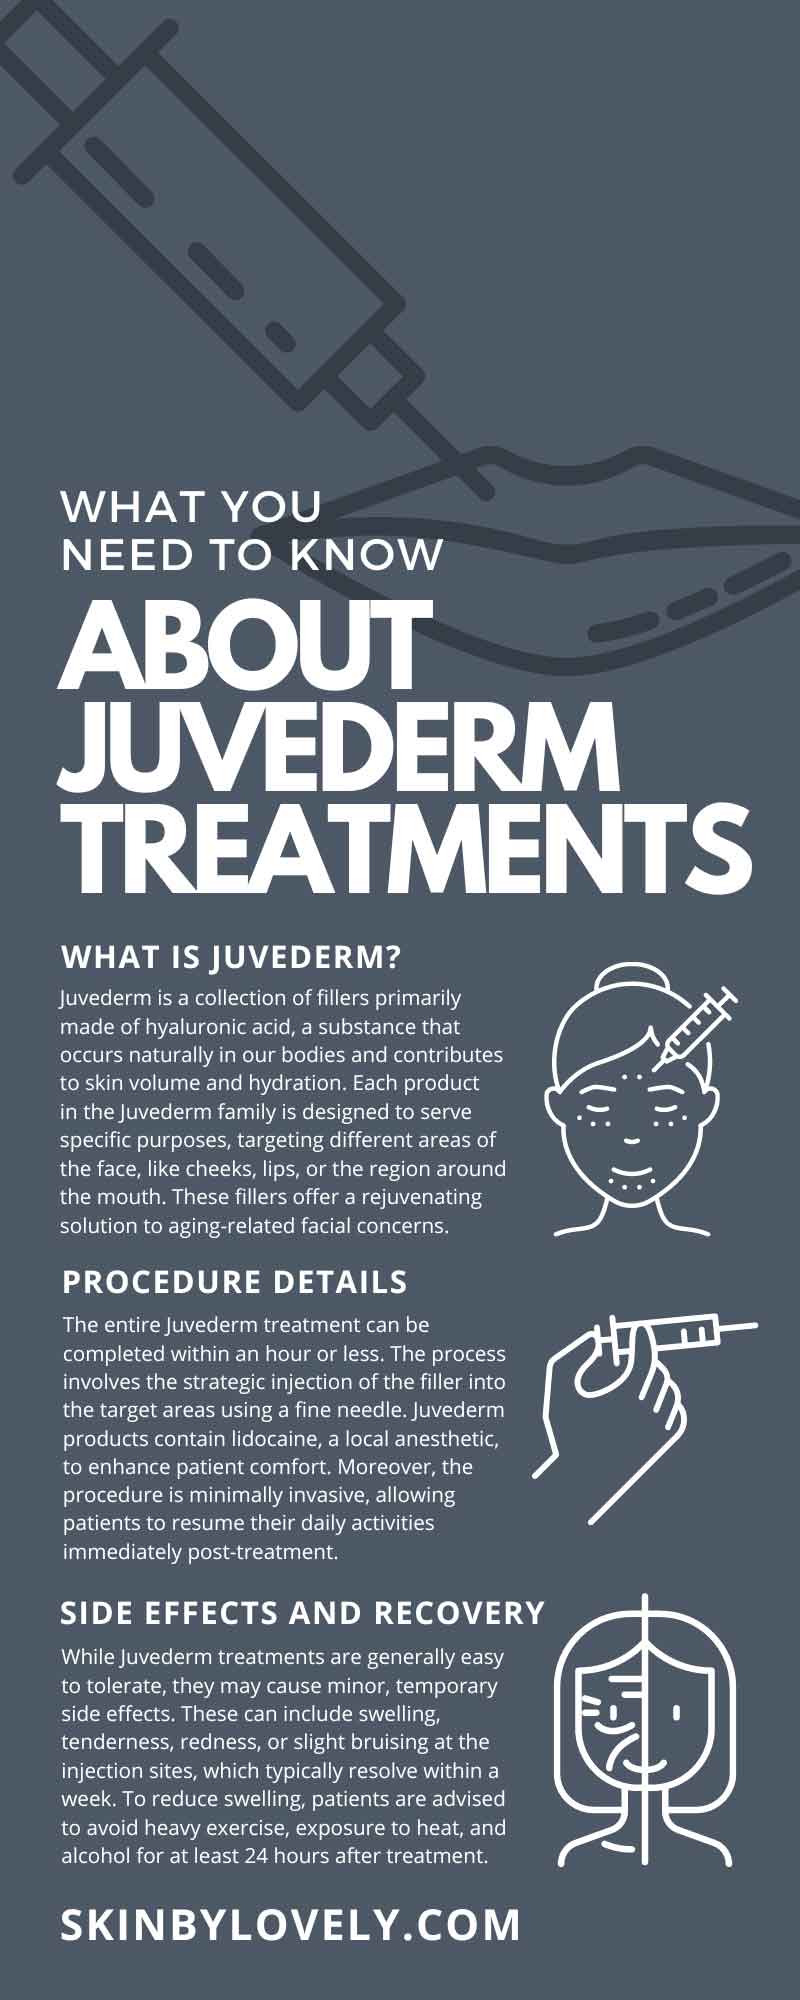 What You Need To Know About Juvederm Treatments